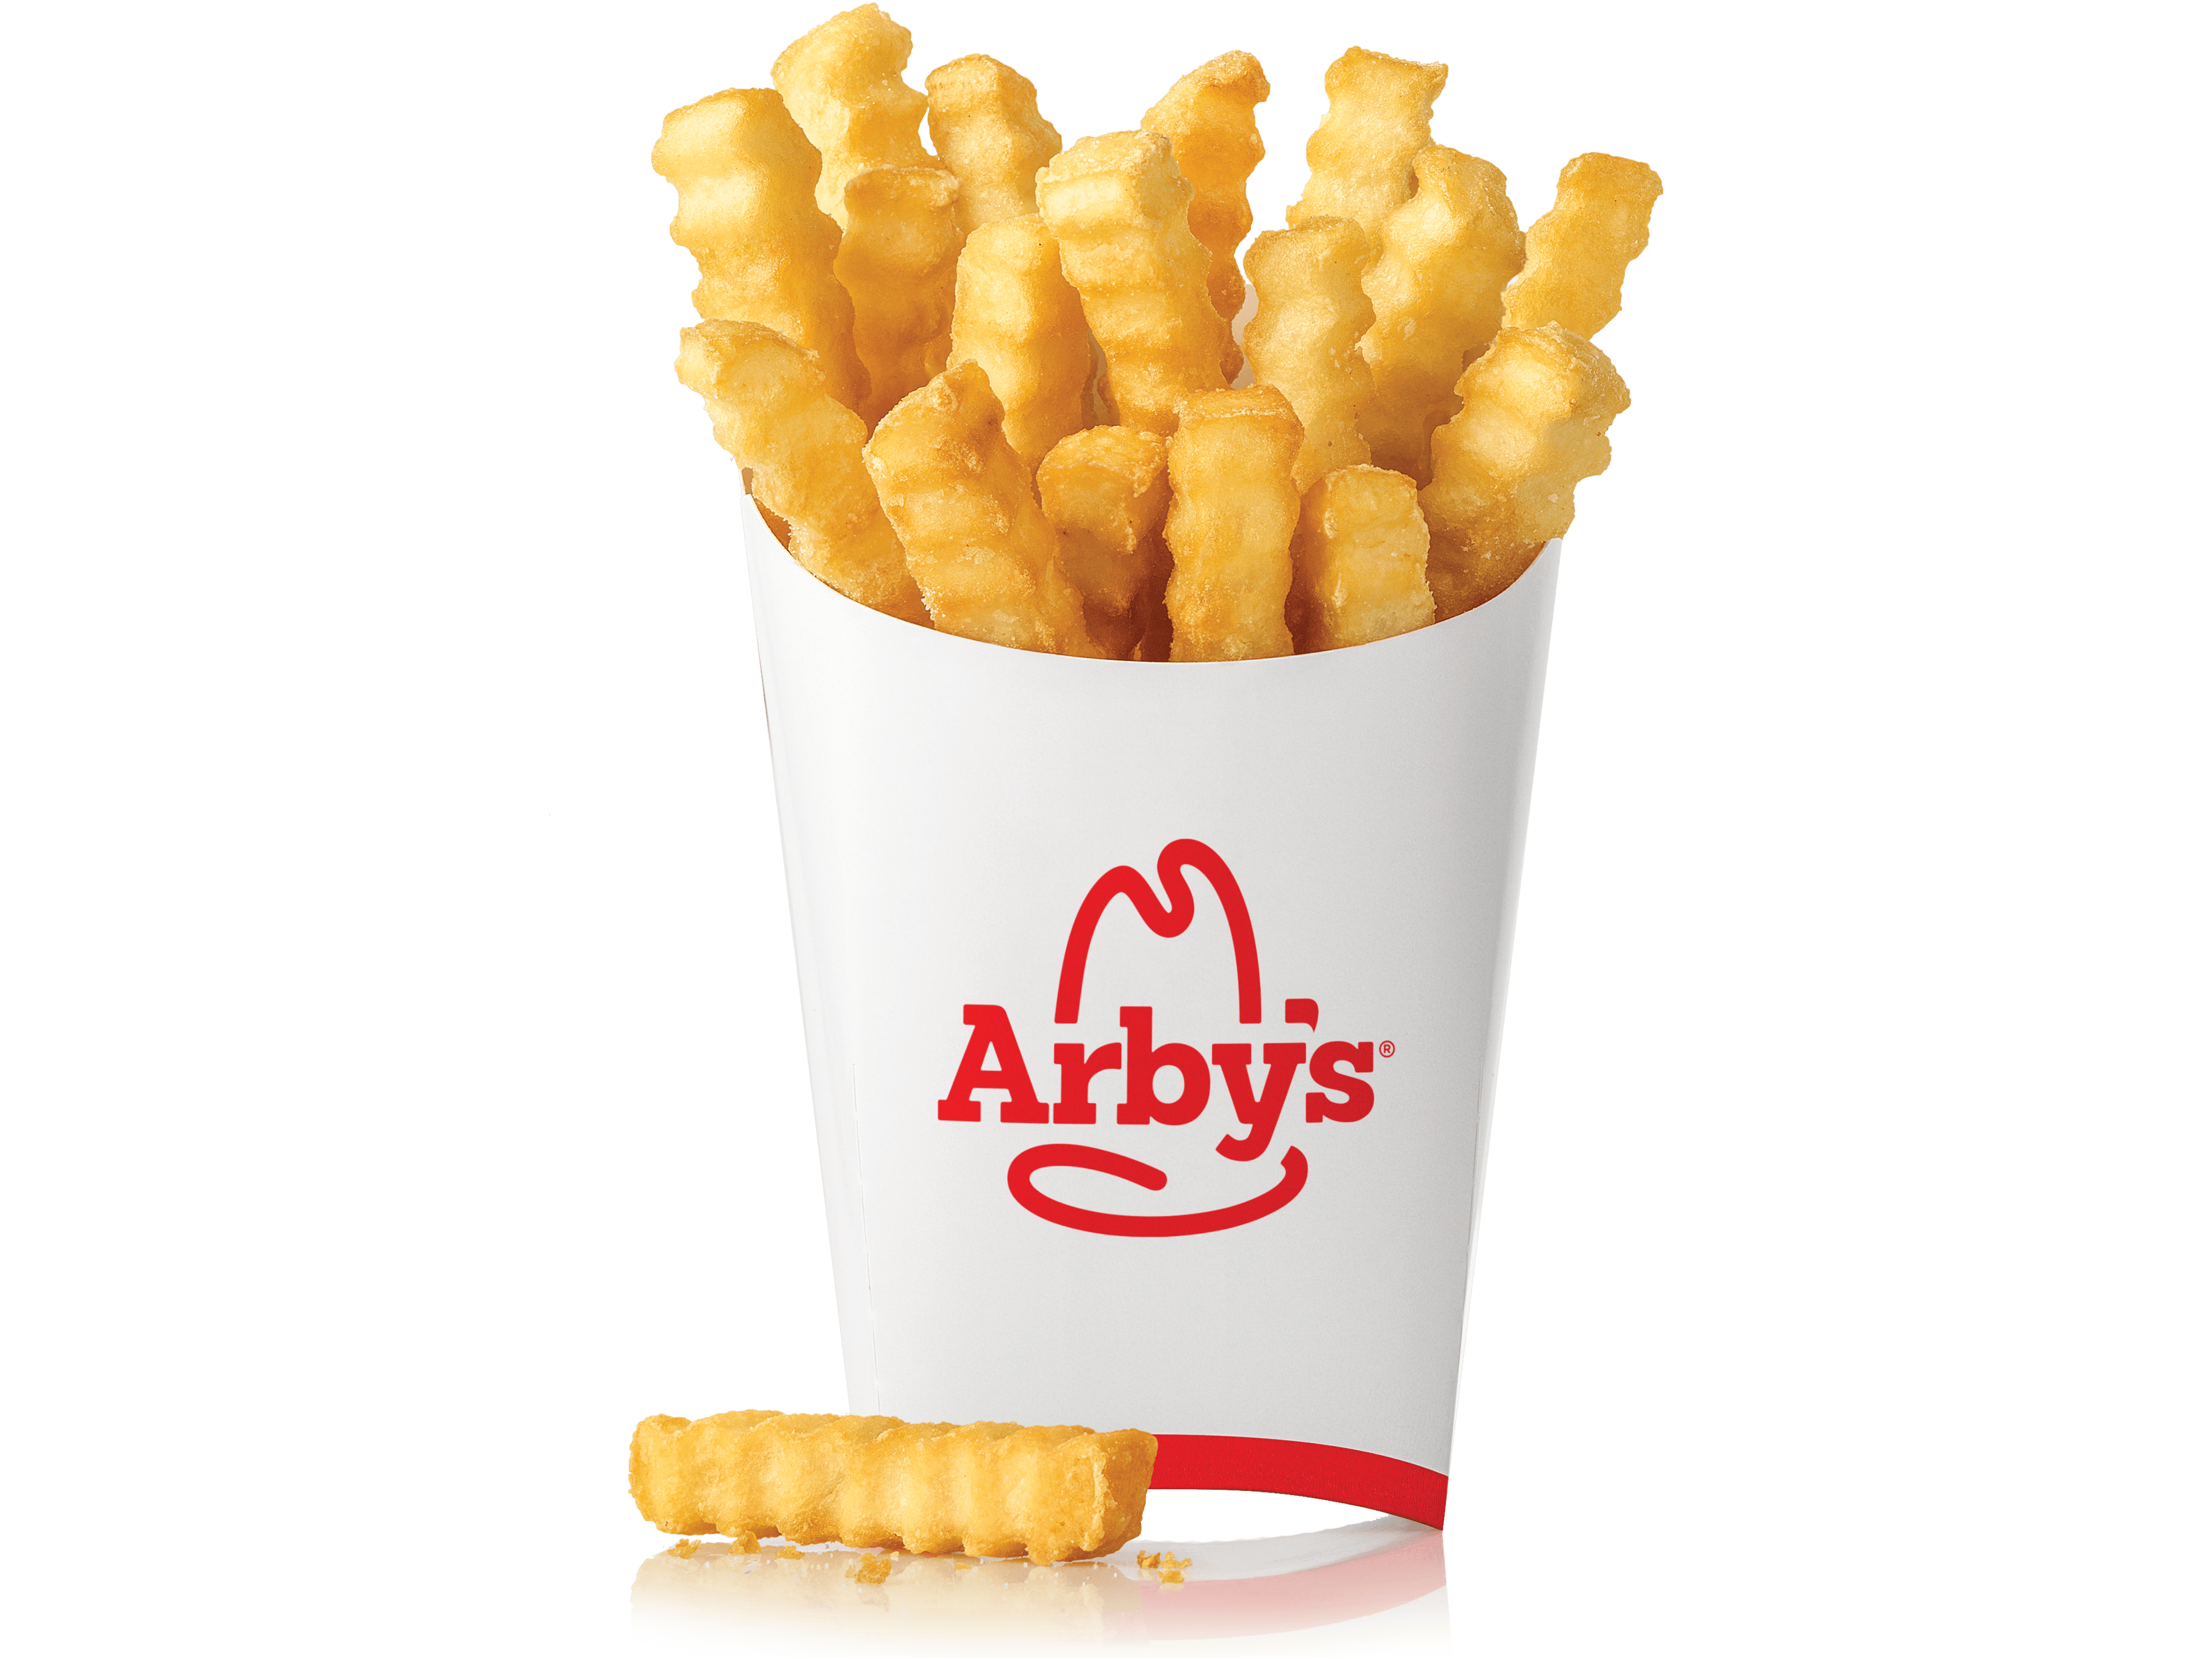 Arby's Medium Crinkle Fries Nutrition Facts